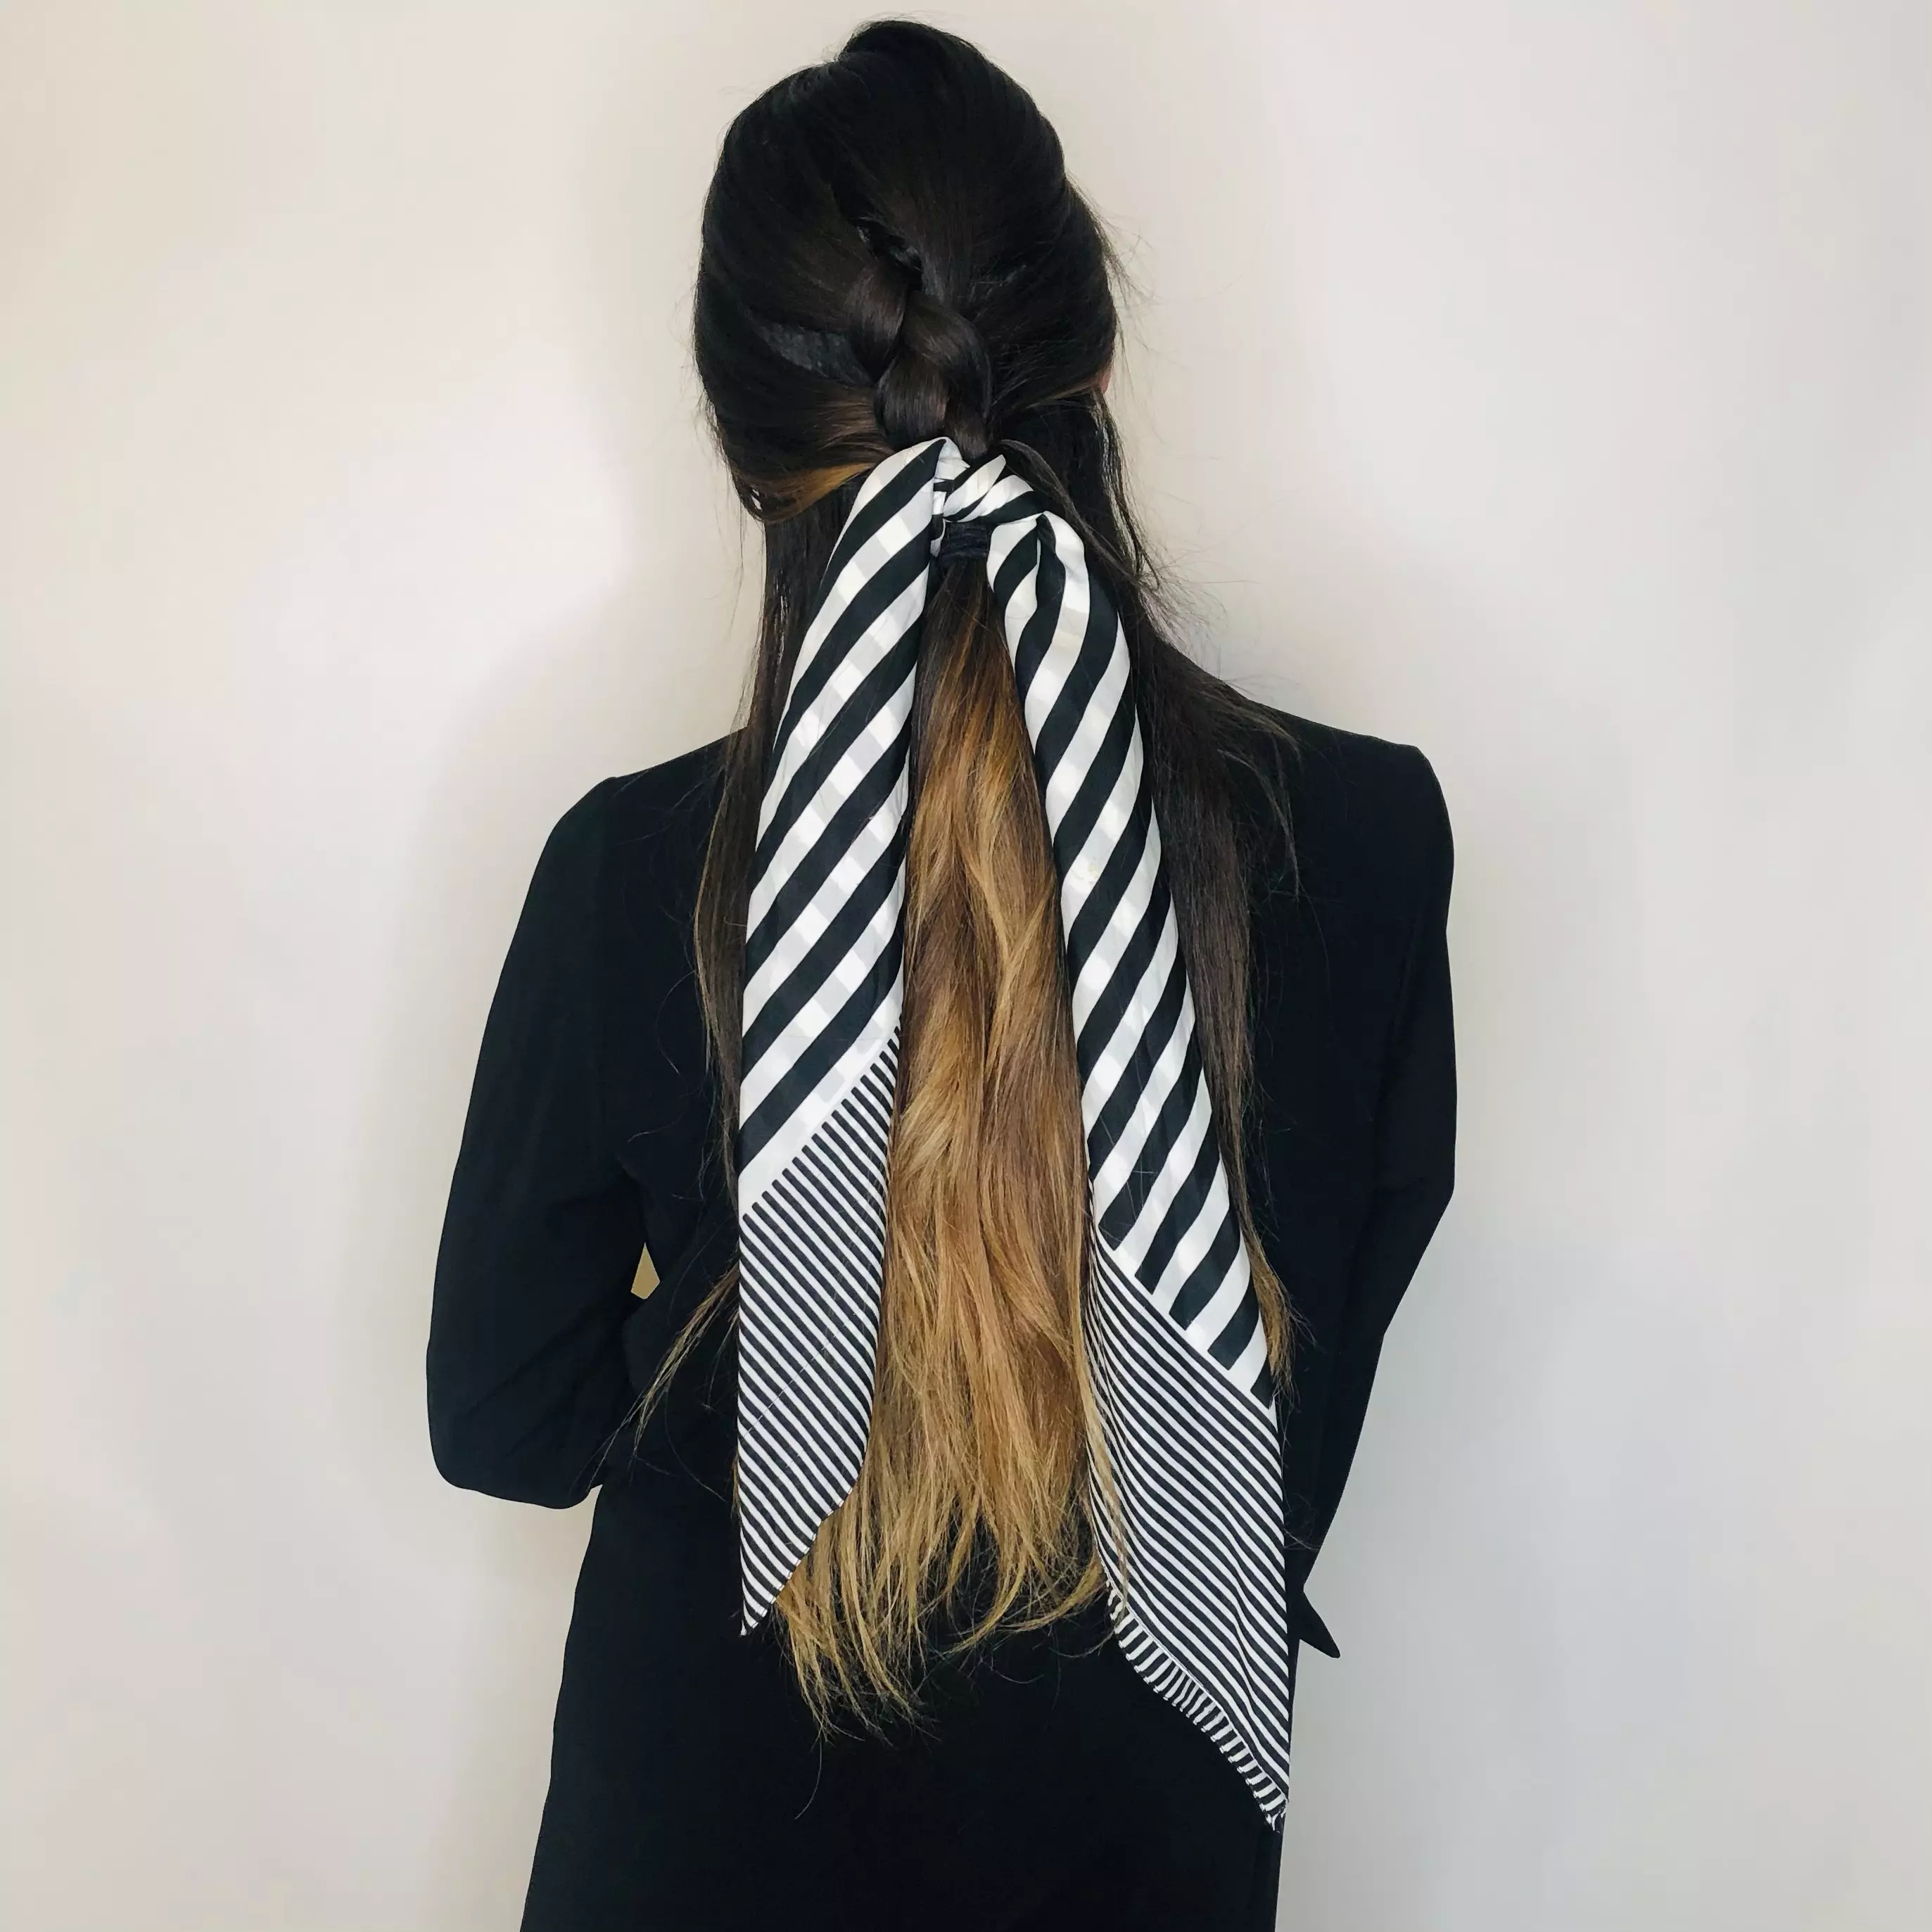 Hairstyle with Scarf Ends Left to Hang Loosely